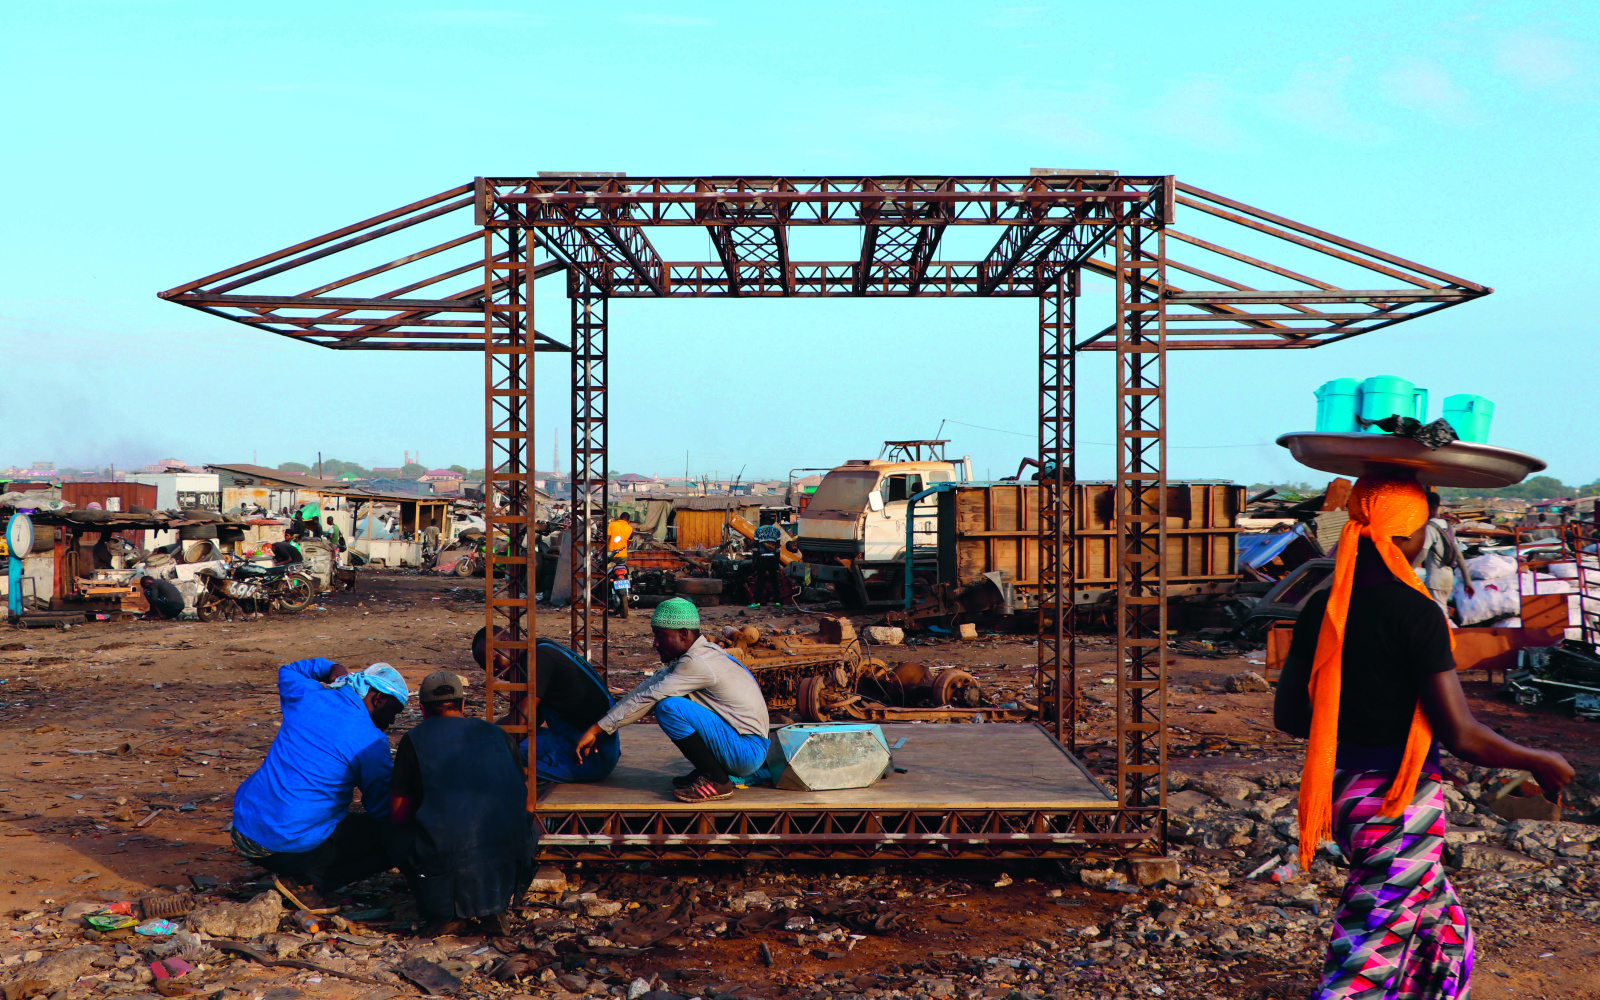 Something is being built in a scrap yard: A walk-in square made of metal struts. A builder is squatting in it.